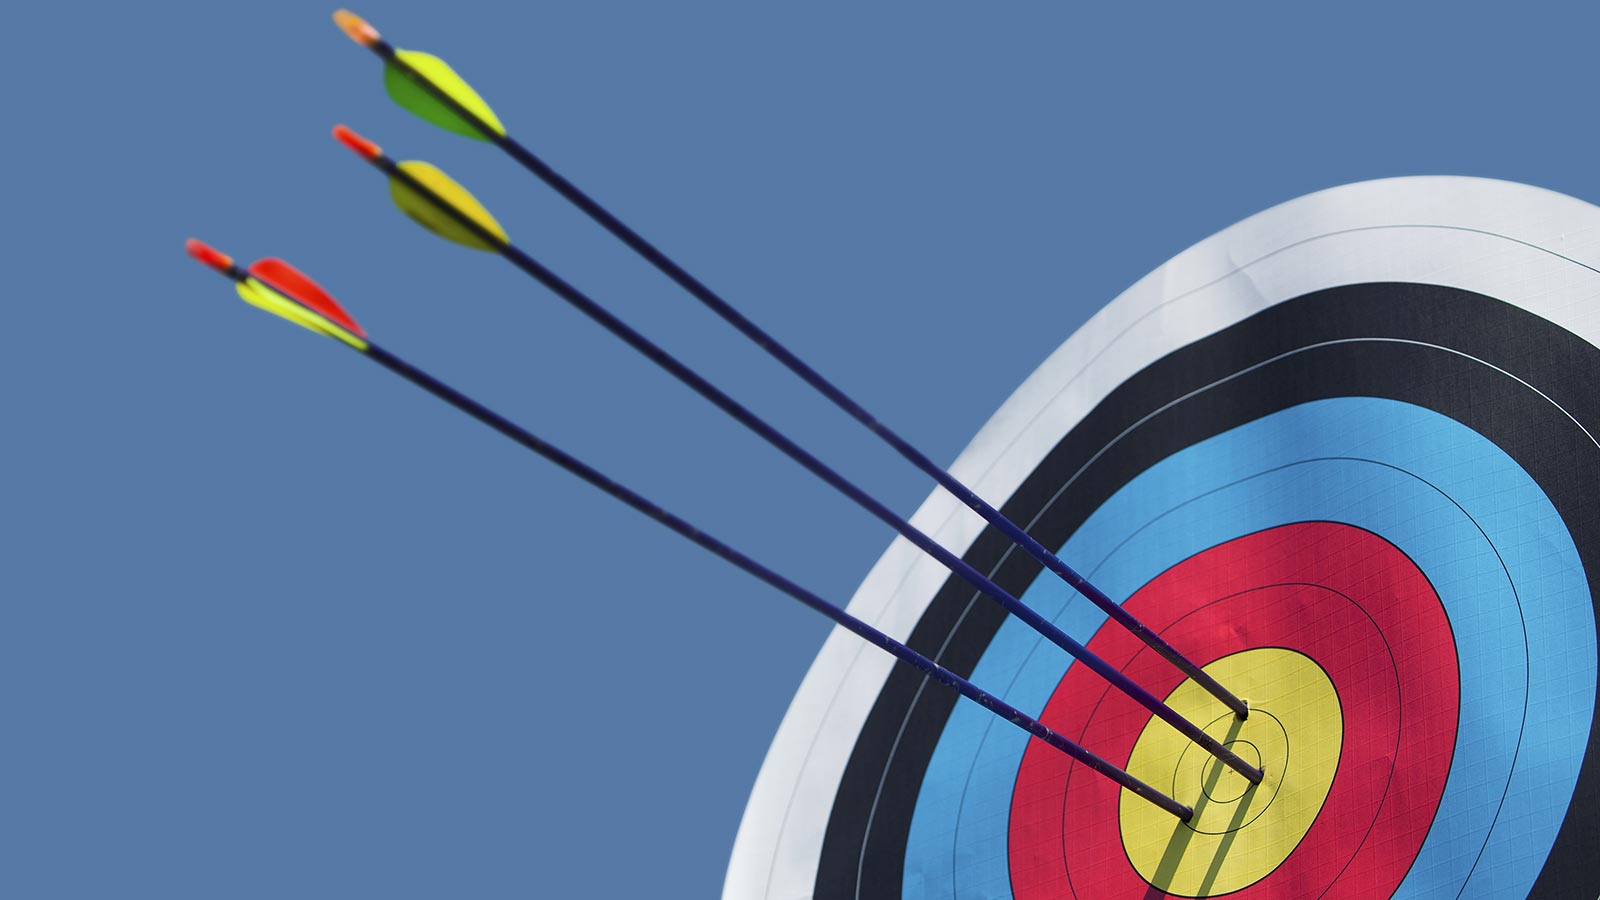 Image For Archery Target Wallpaper